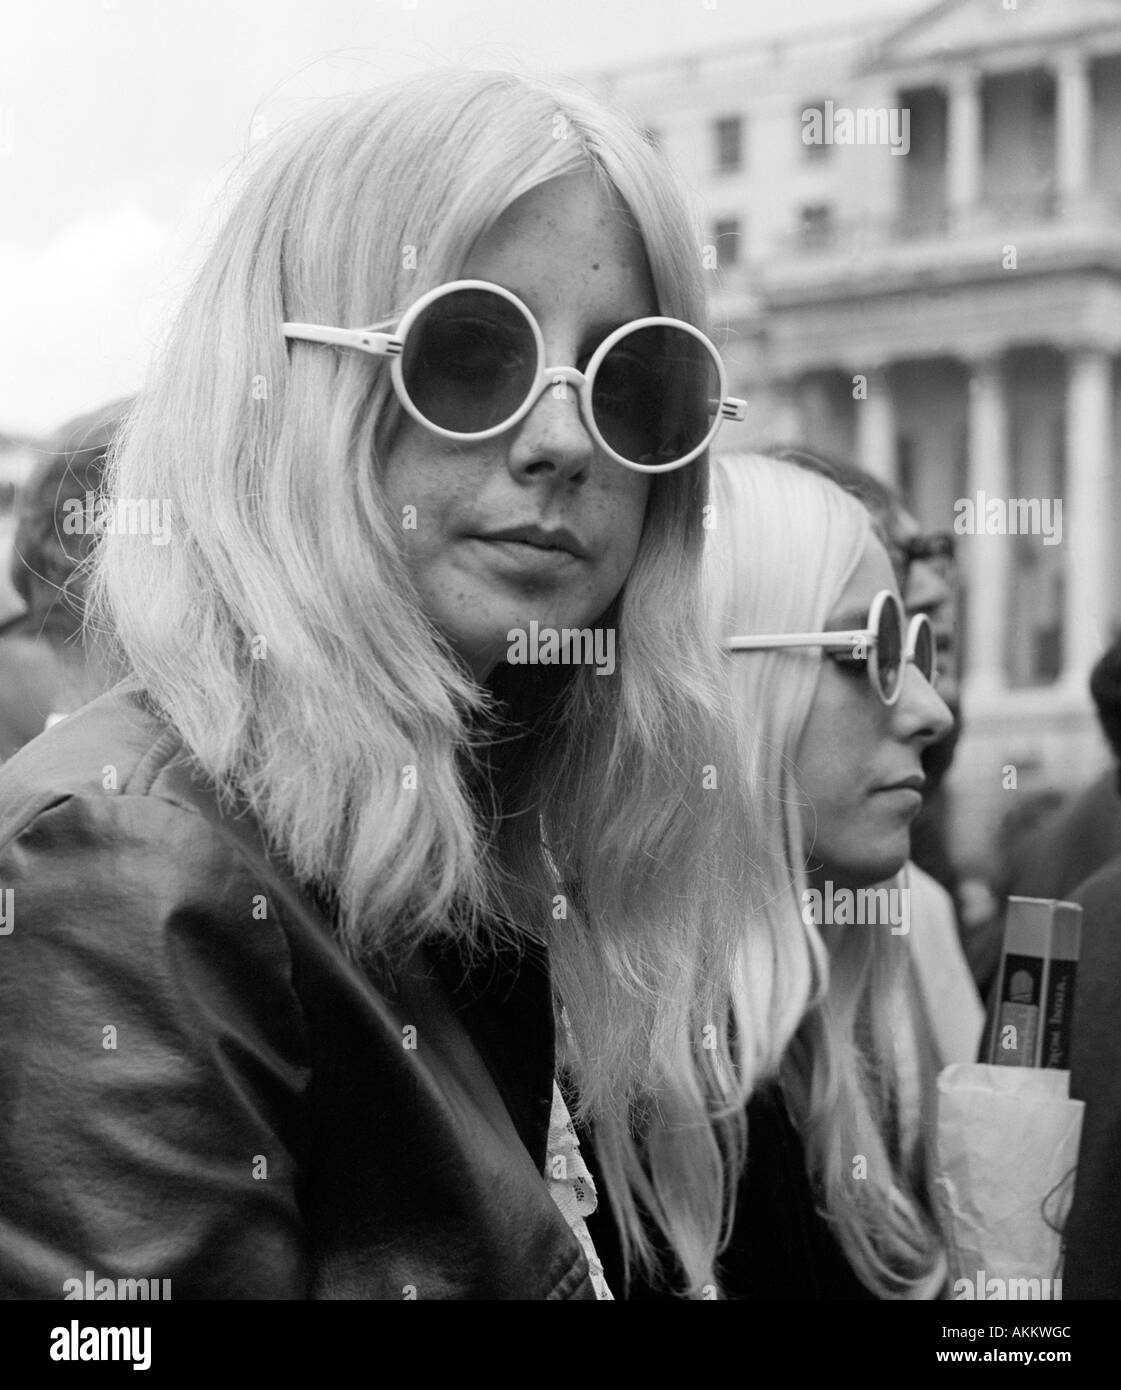 Two young girls during an Anti-Vietnam War Demonstration, London, 17 March 1968. Stock Photo